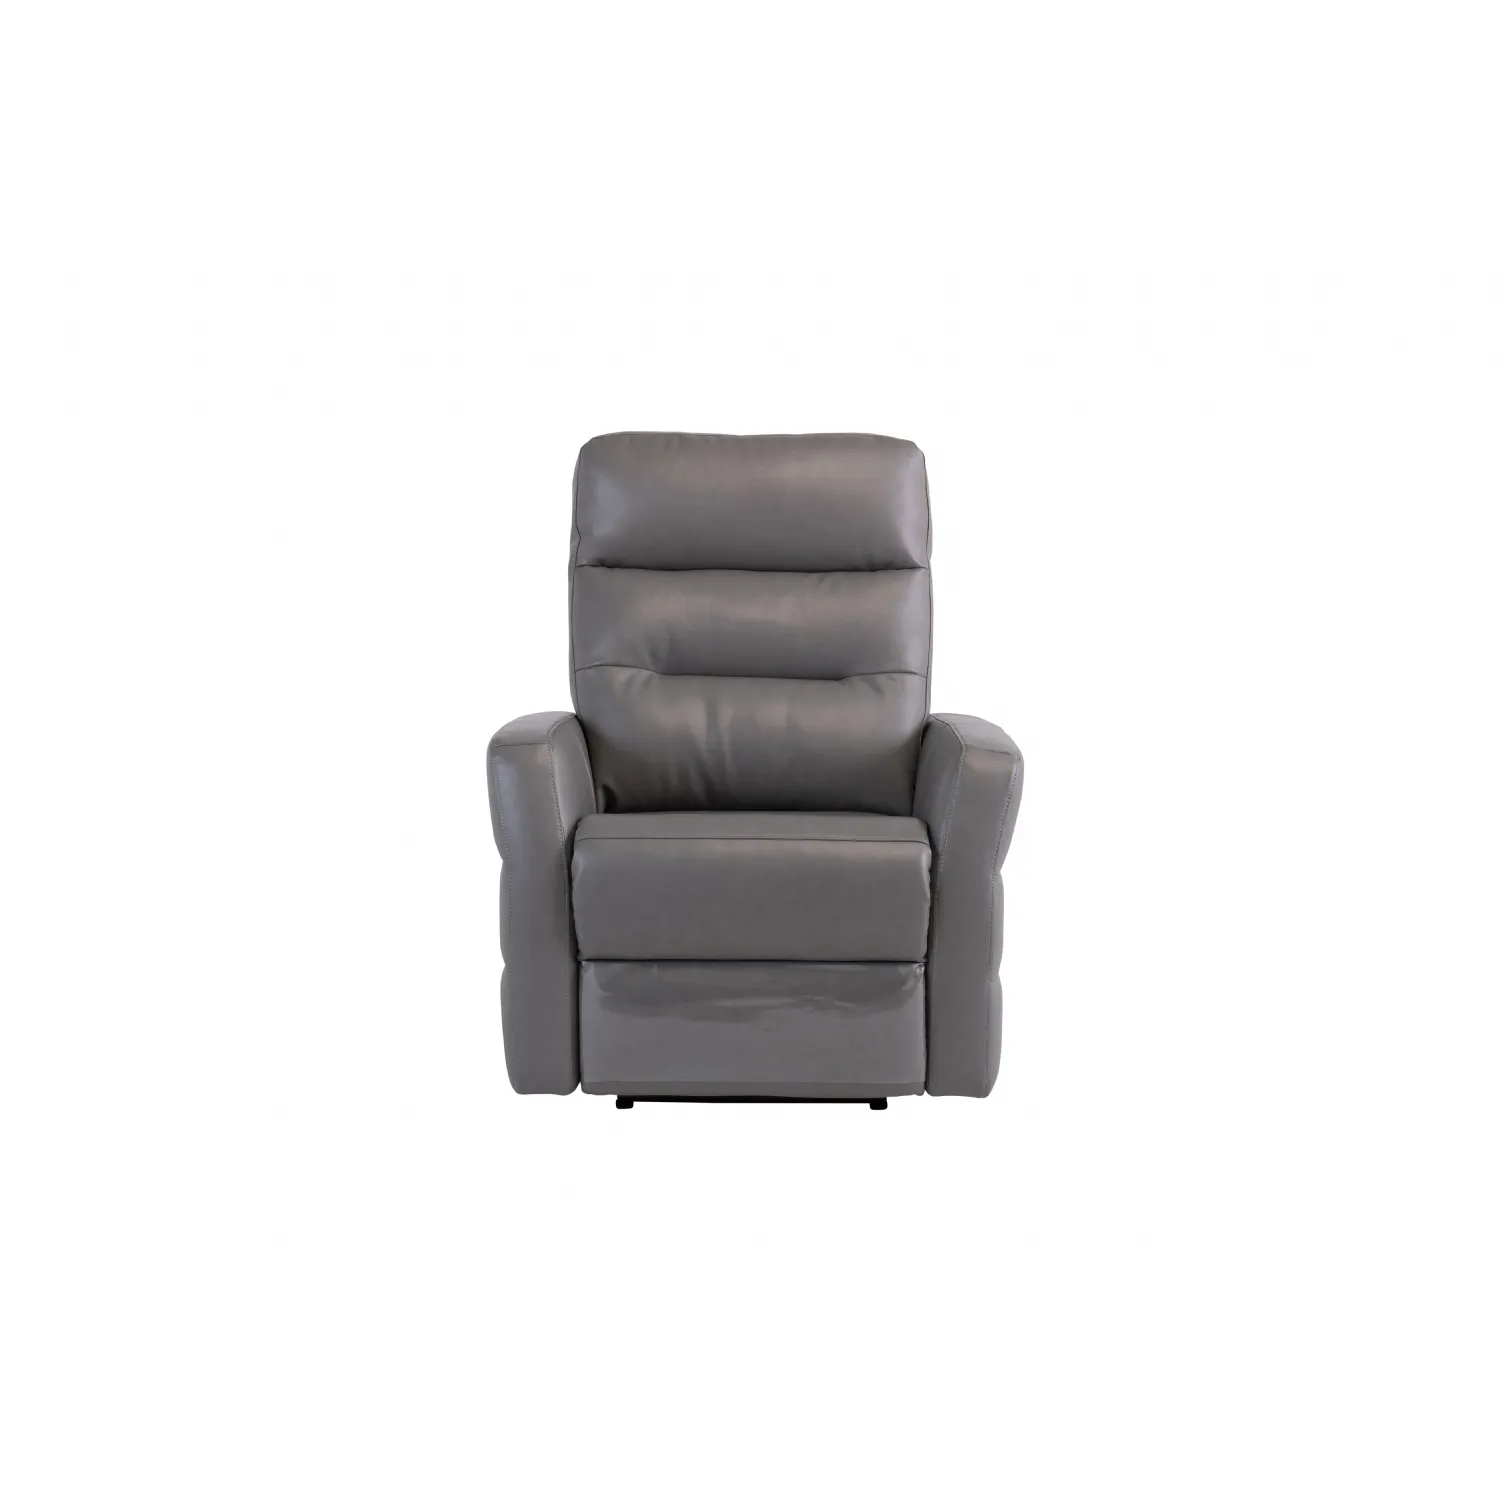 Light Grey Leather Electric Recliner Armchair